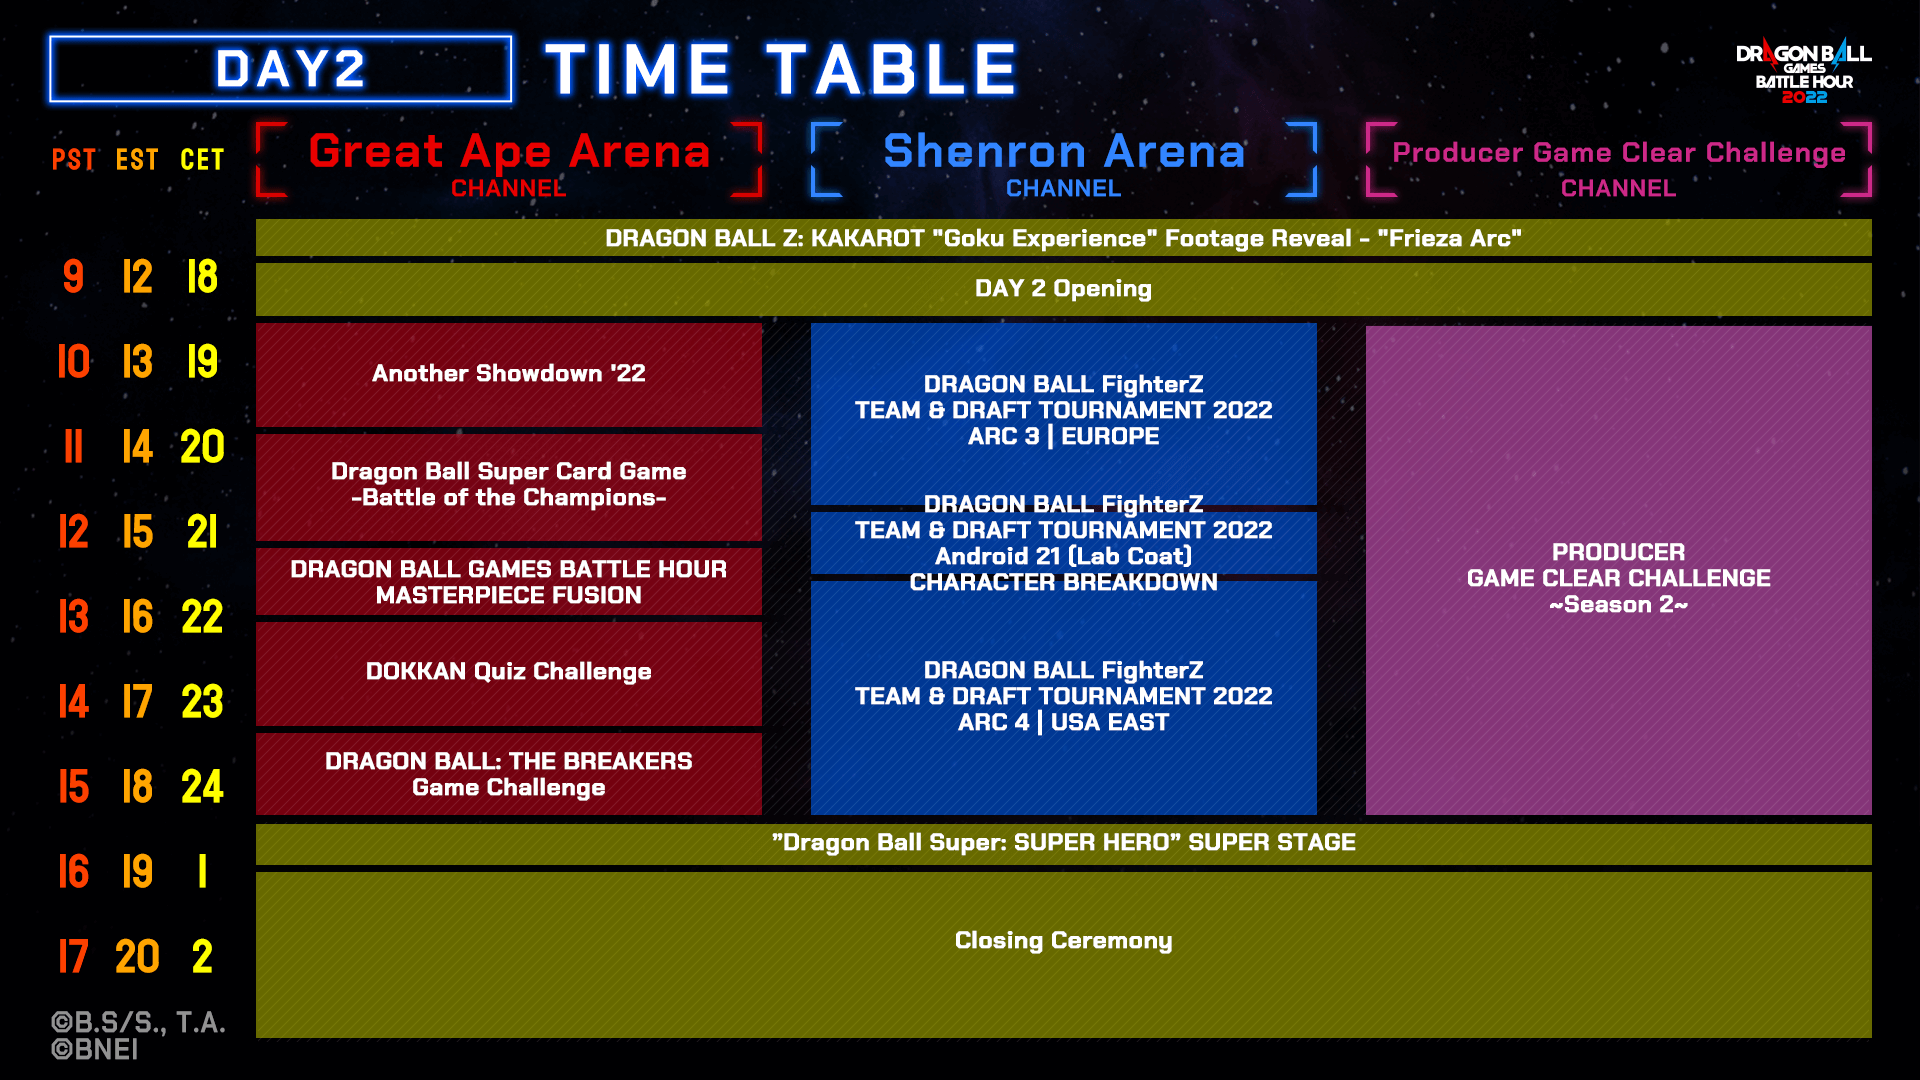 Official “DRAGON BALL Games Battle Hour 2022” event schedule - Day 2